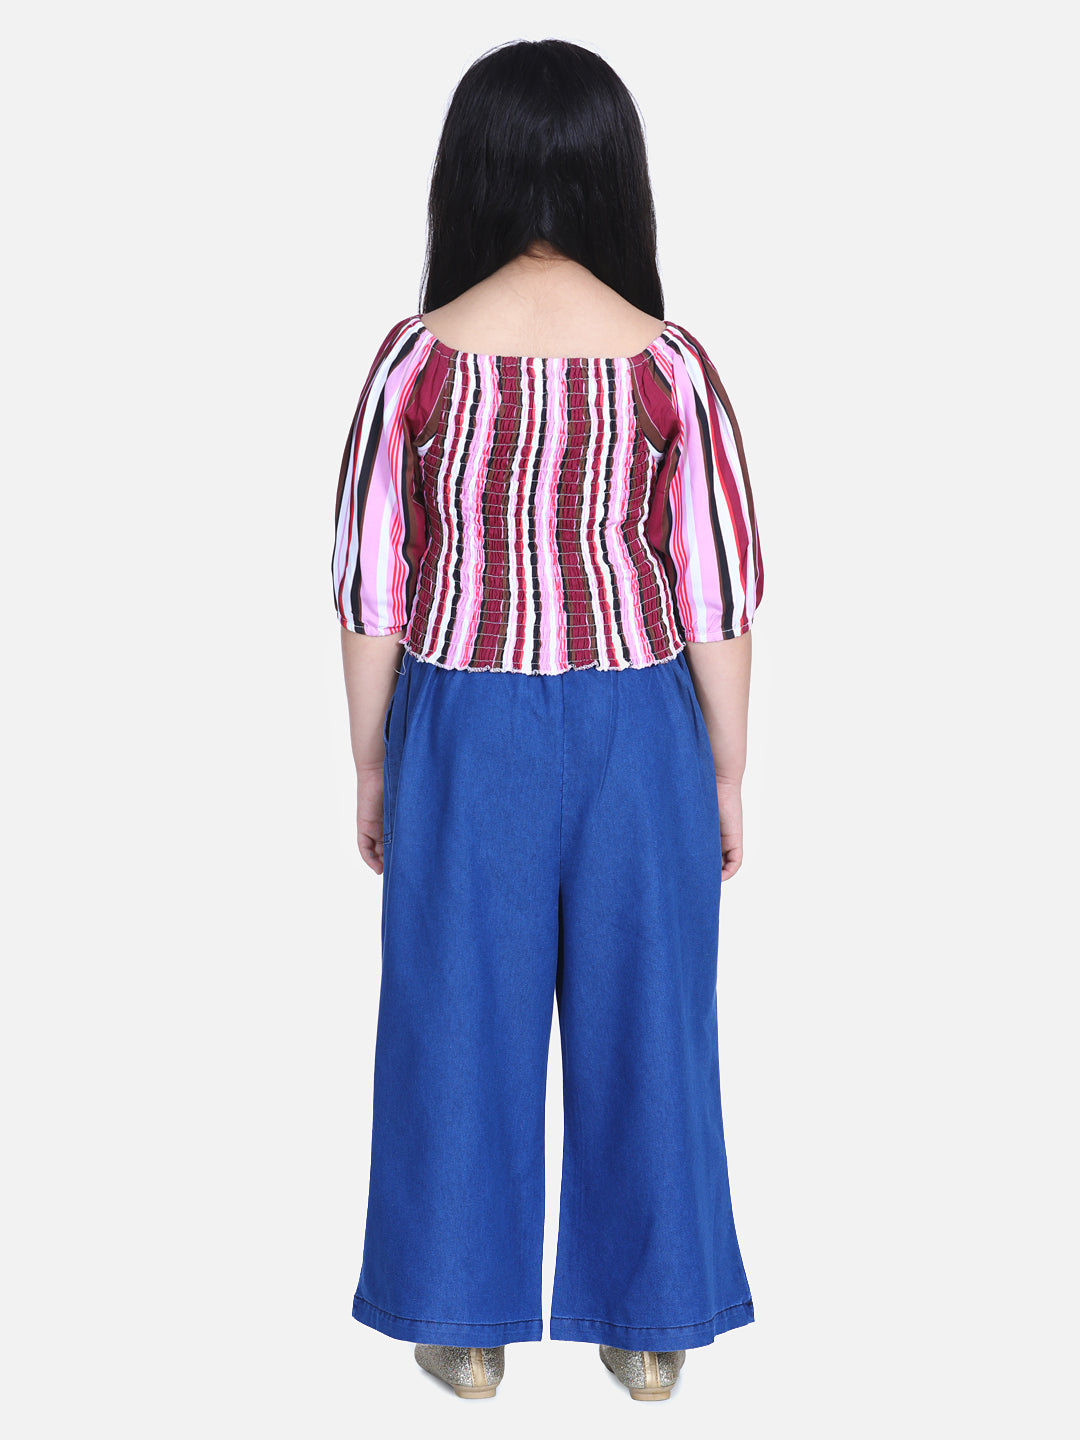 Girls Striped Smocked Top with Denim Culottes